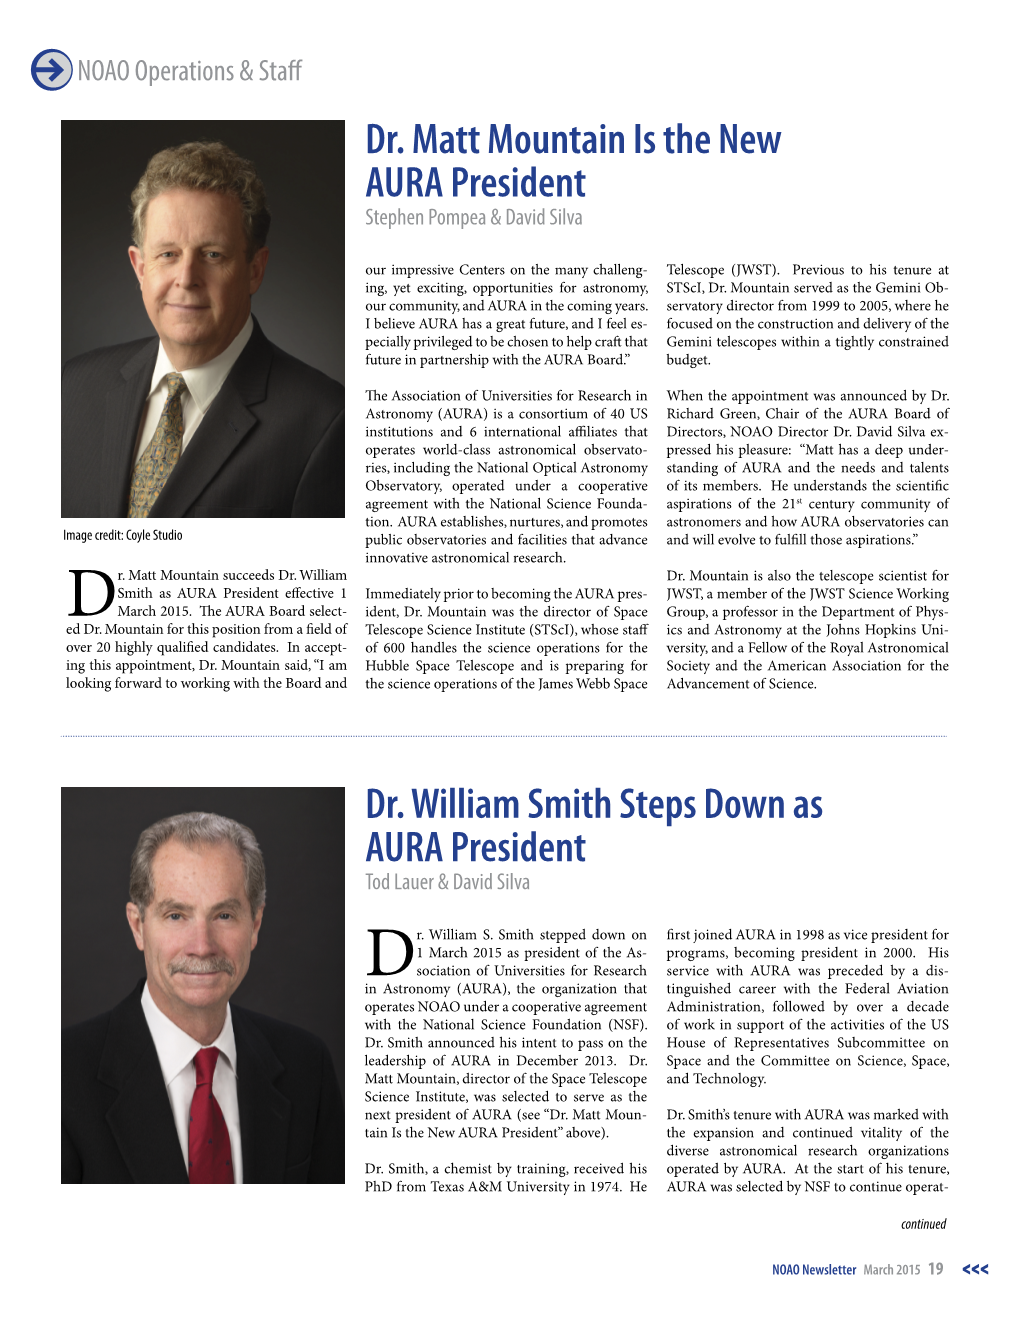 Dr. Matt Mountain Is the New AURA President Dr. William Smith Steps